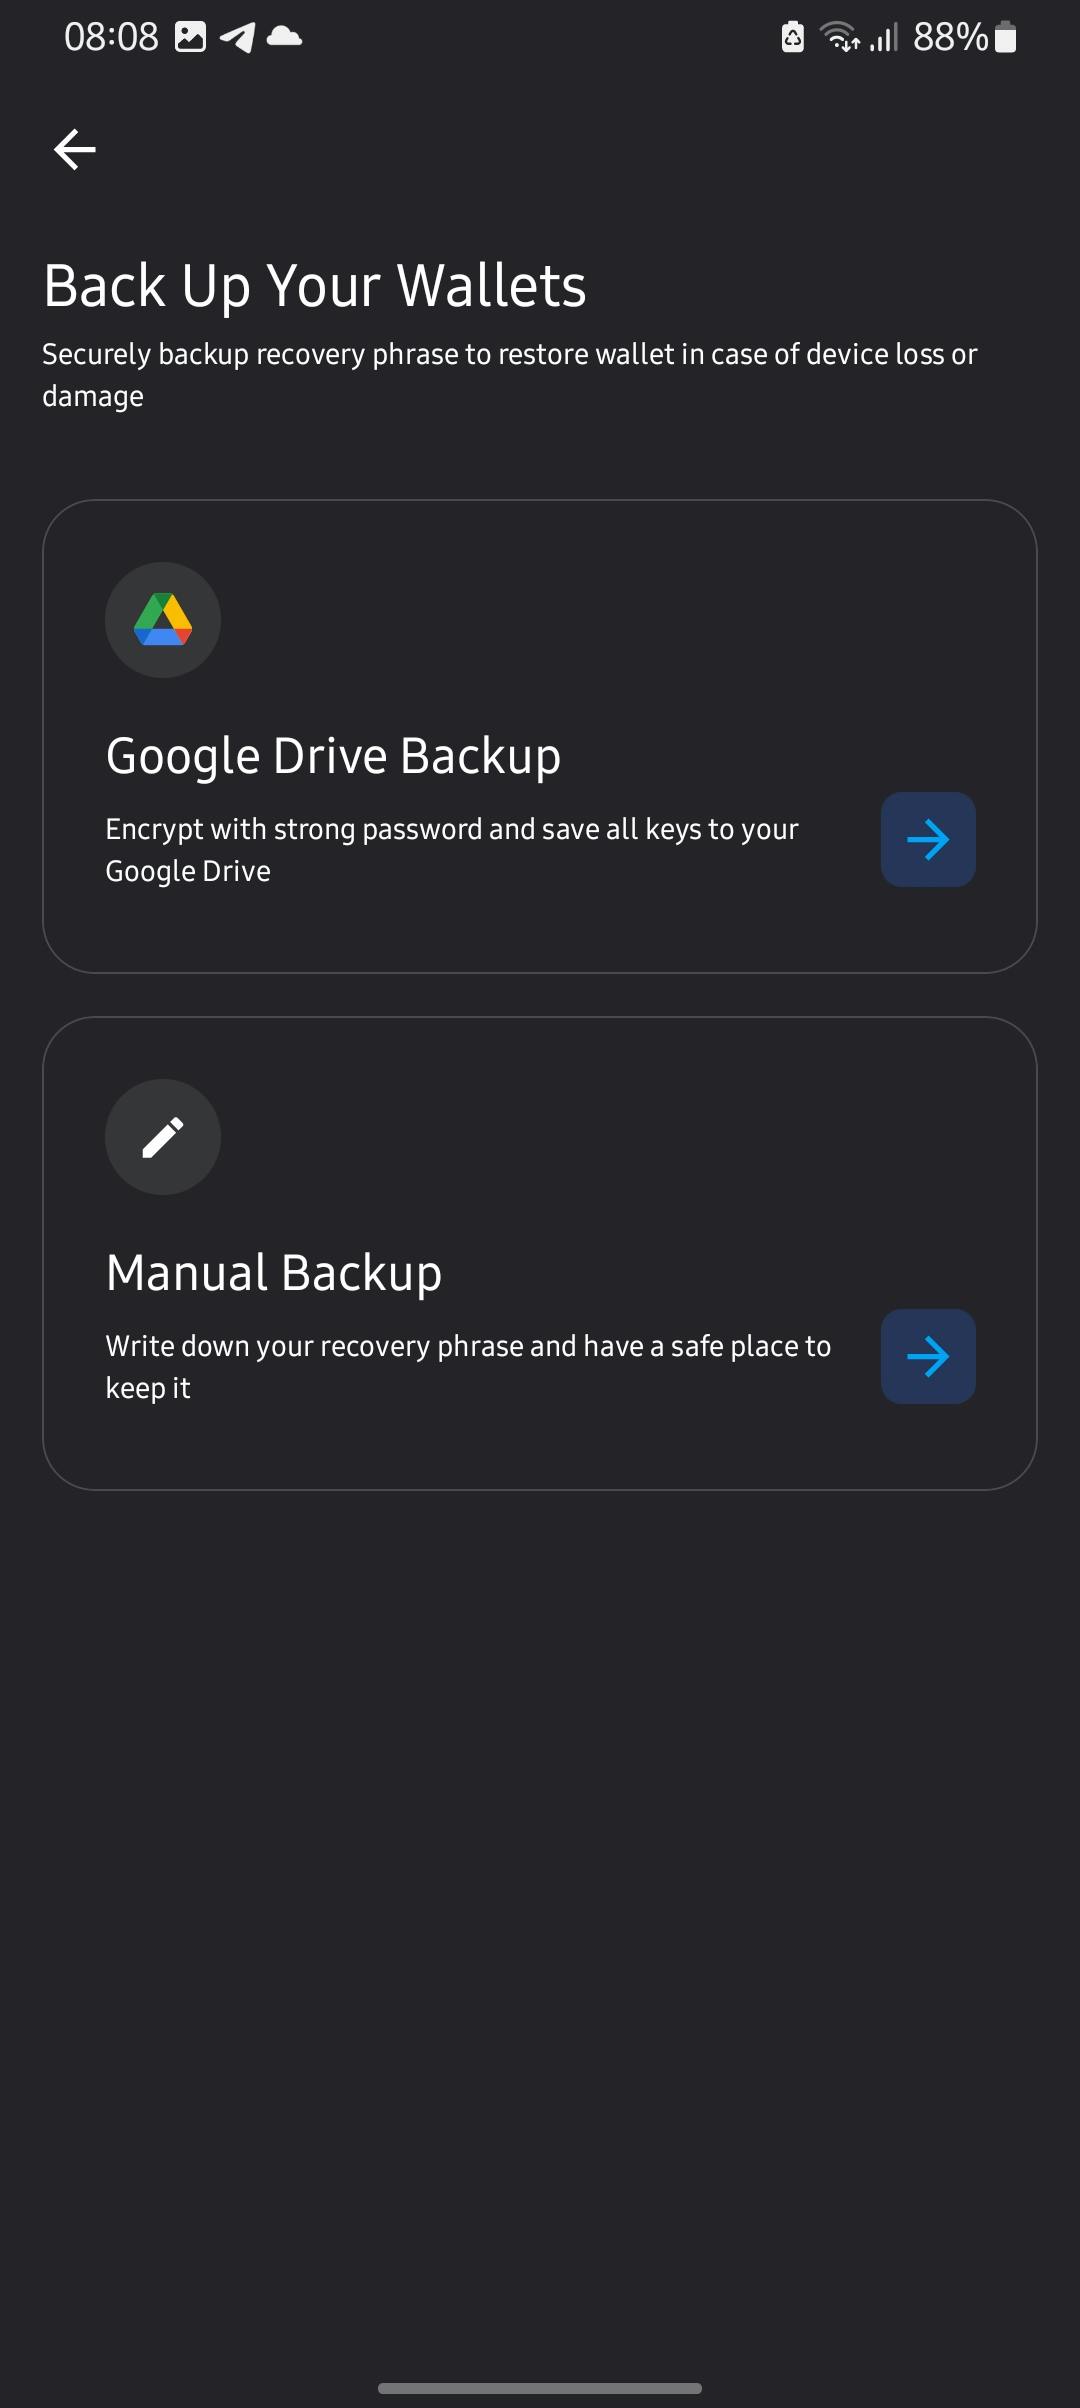 List of options Zerion provides for backing up your wallet